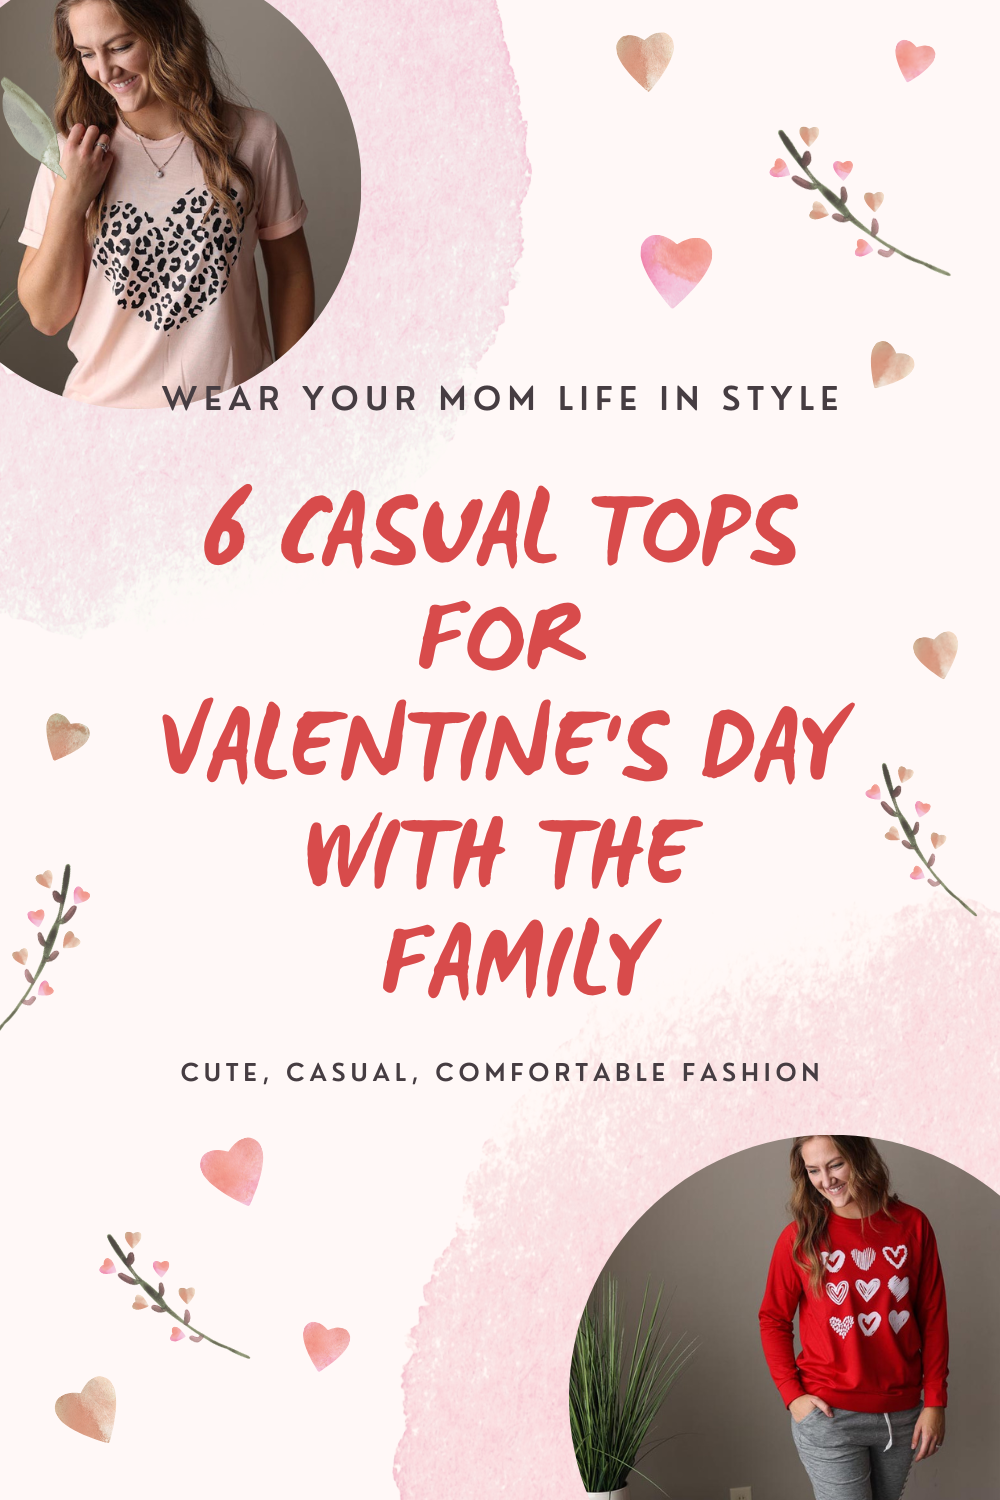 6 Casual Tops for Valentine's Day with the Family